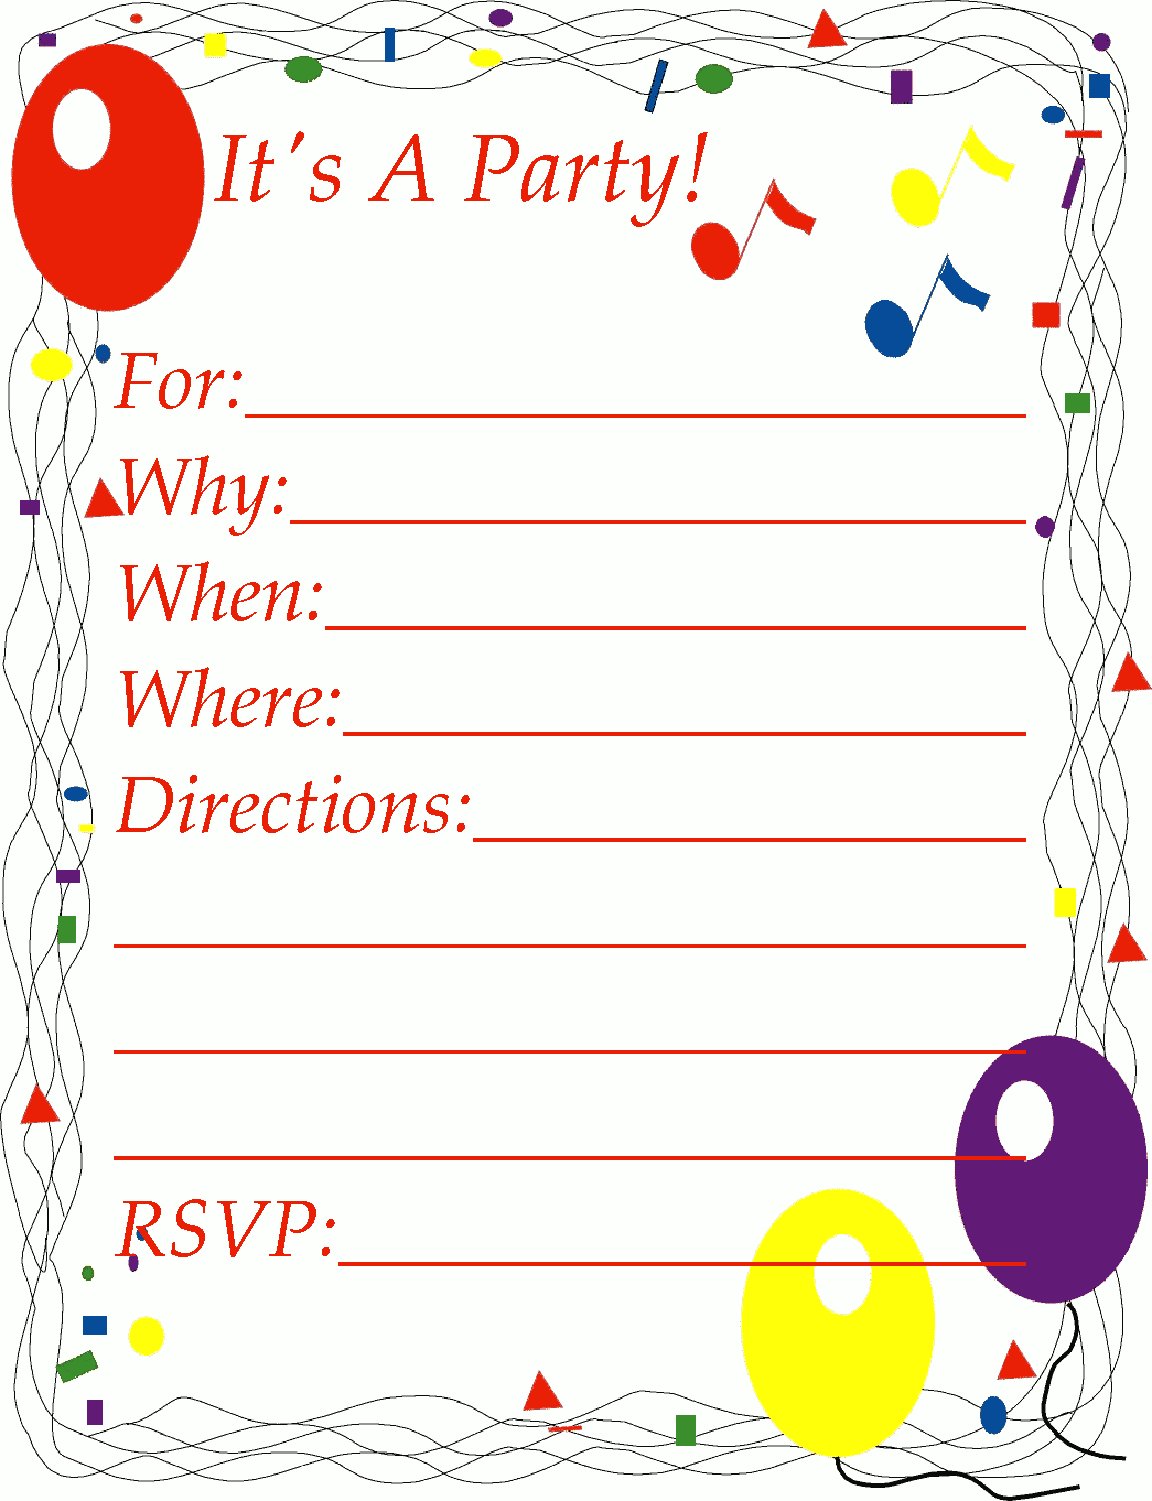 clipart christmas party invitations - photo #40